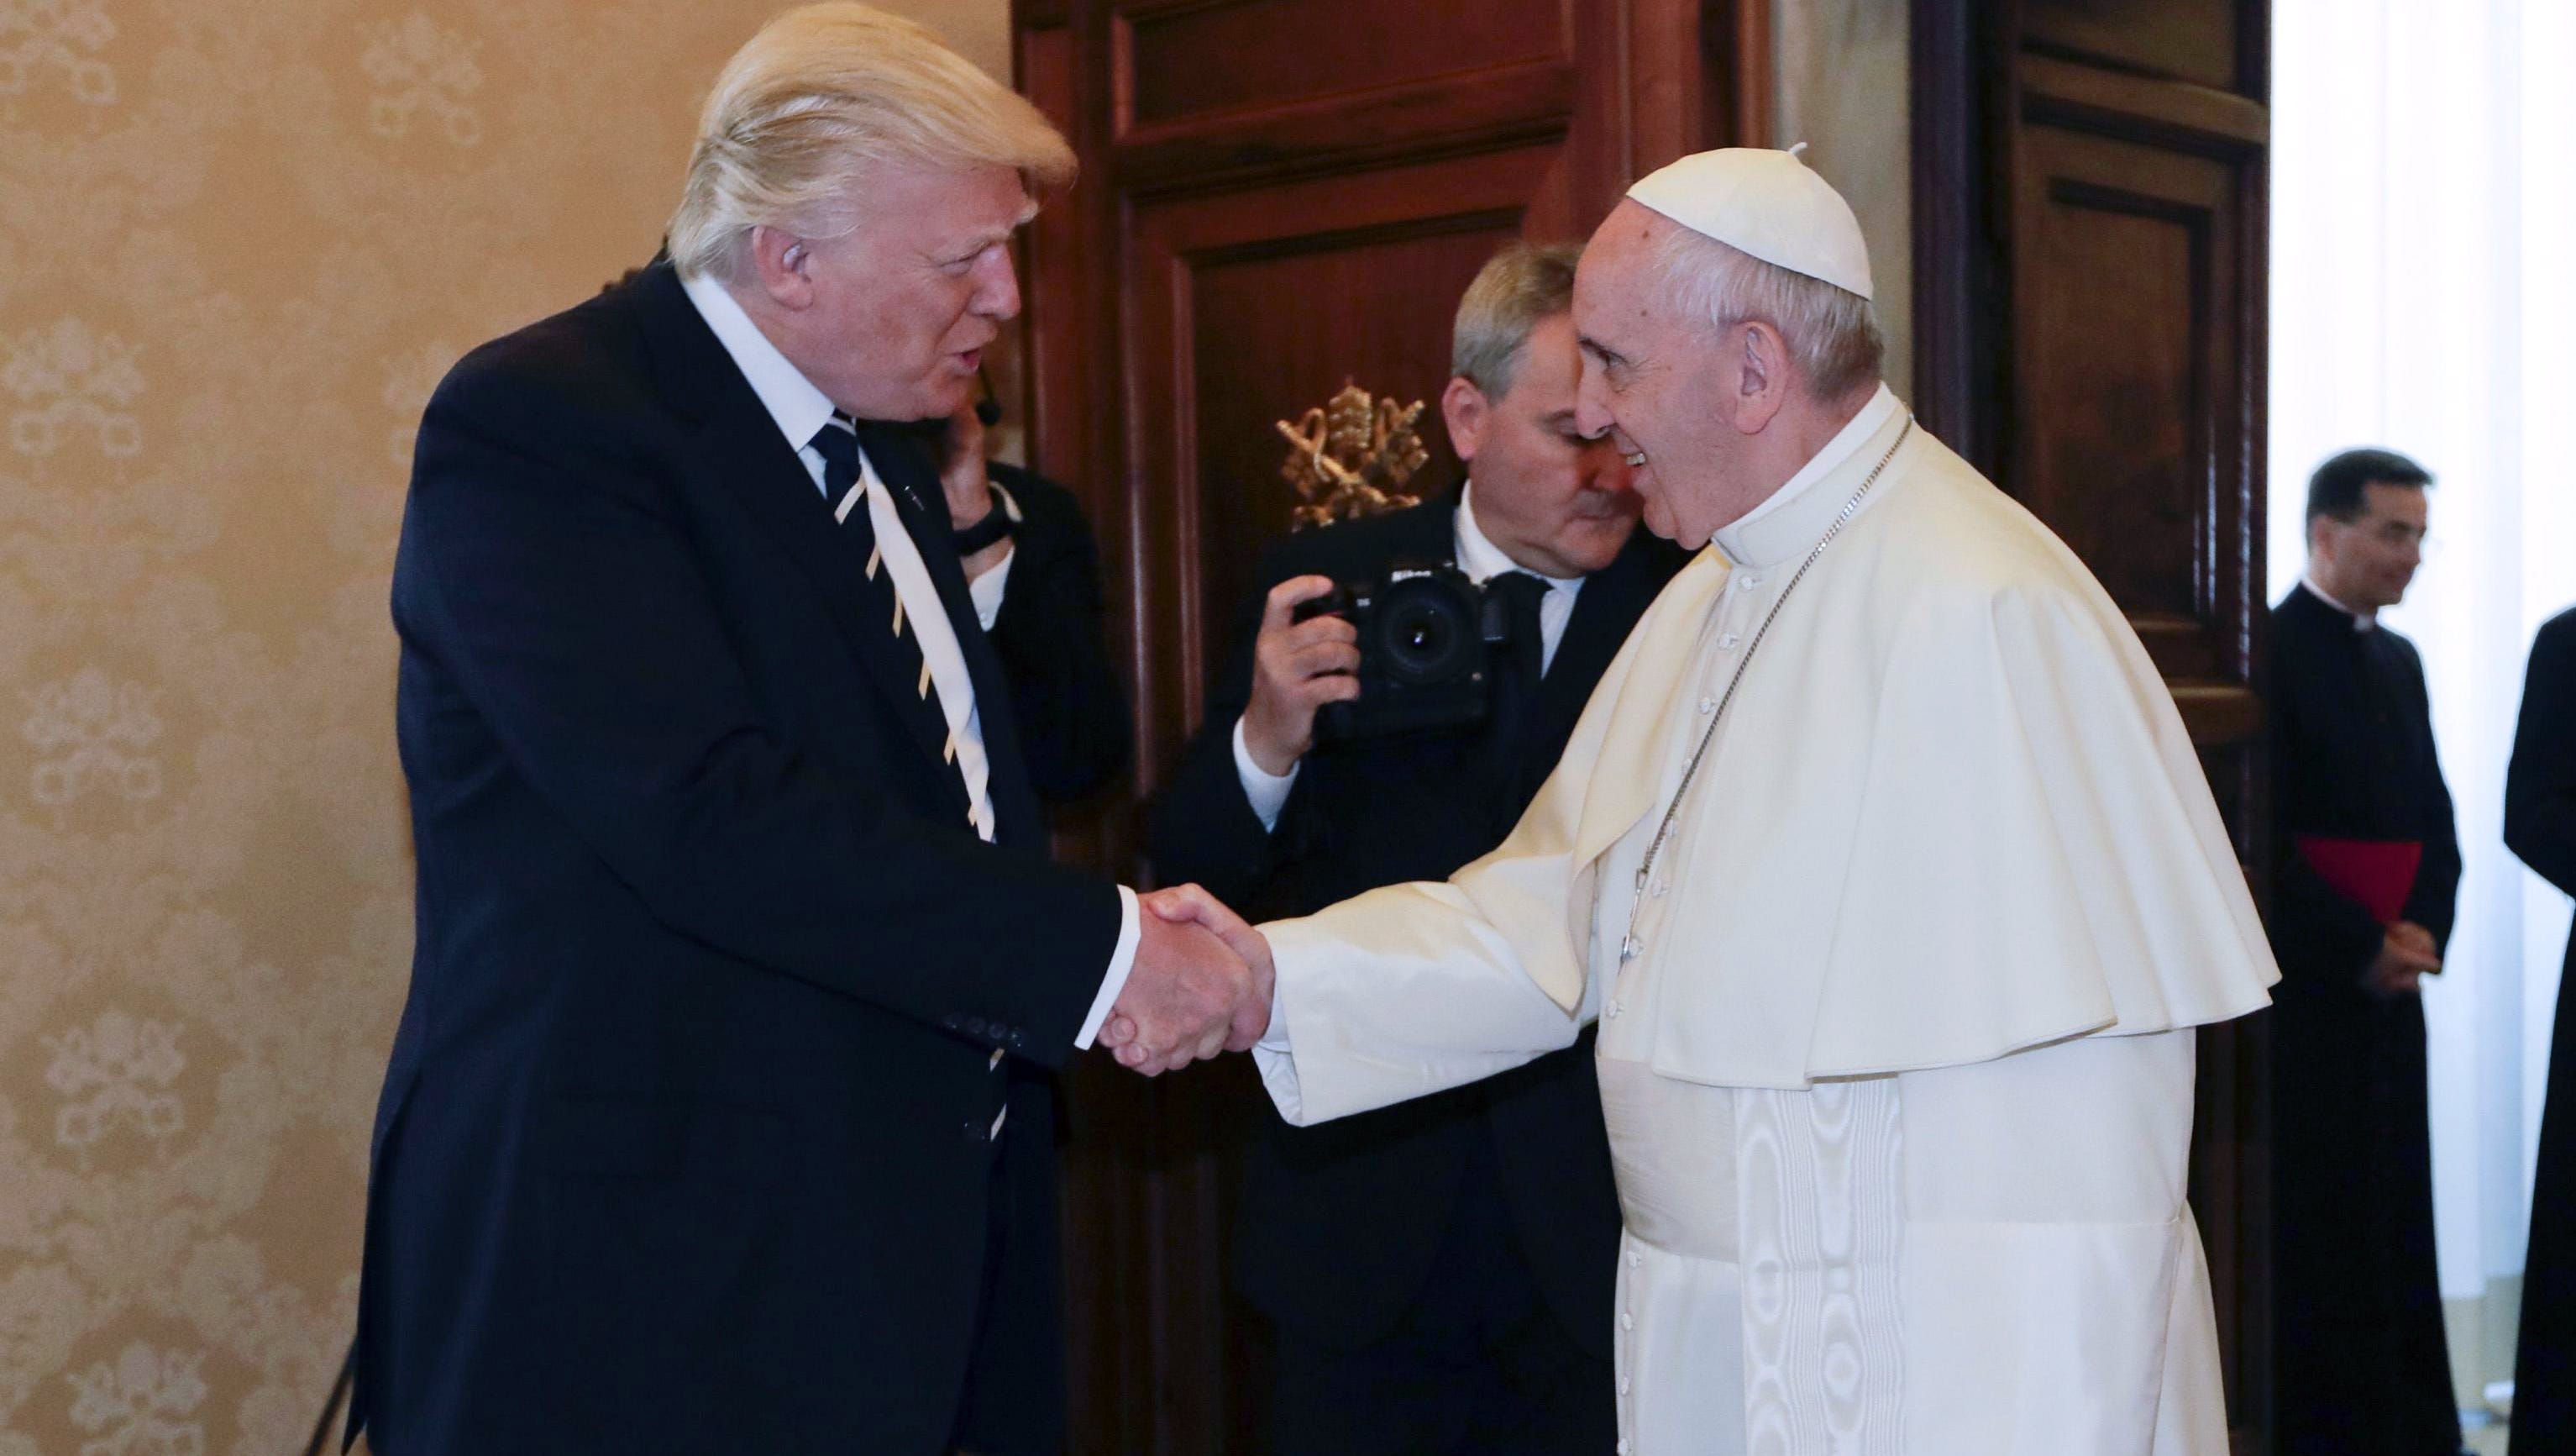 Donald Trump Francis at the can use peace'